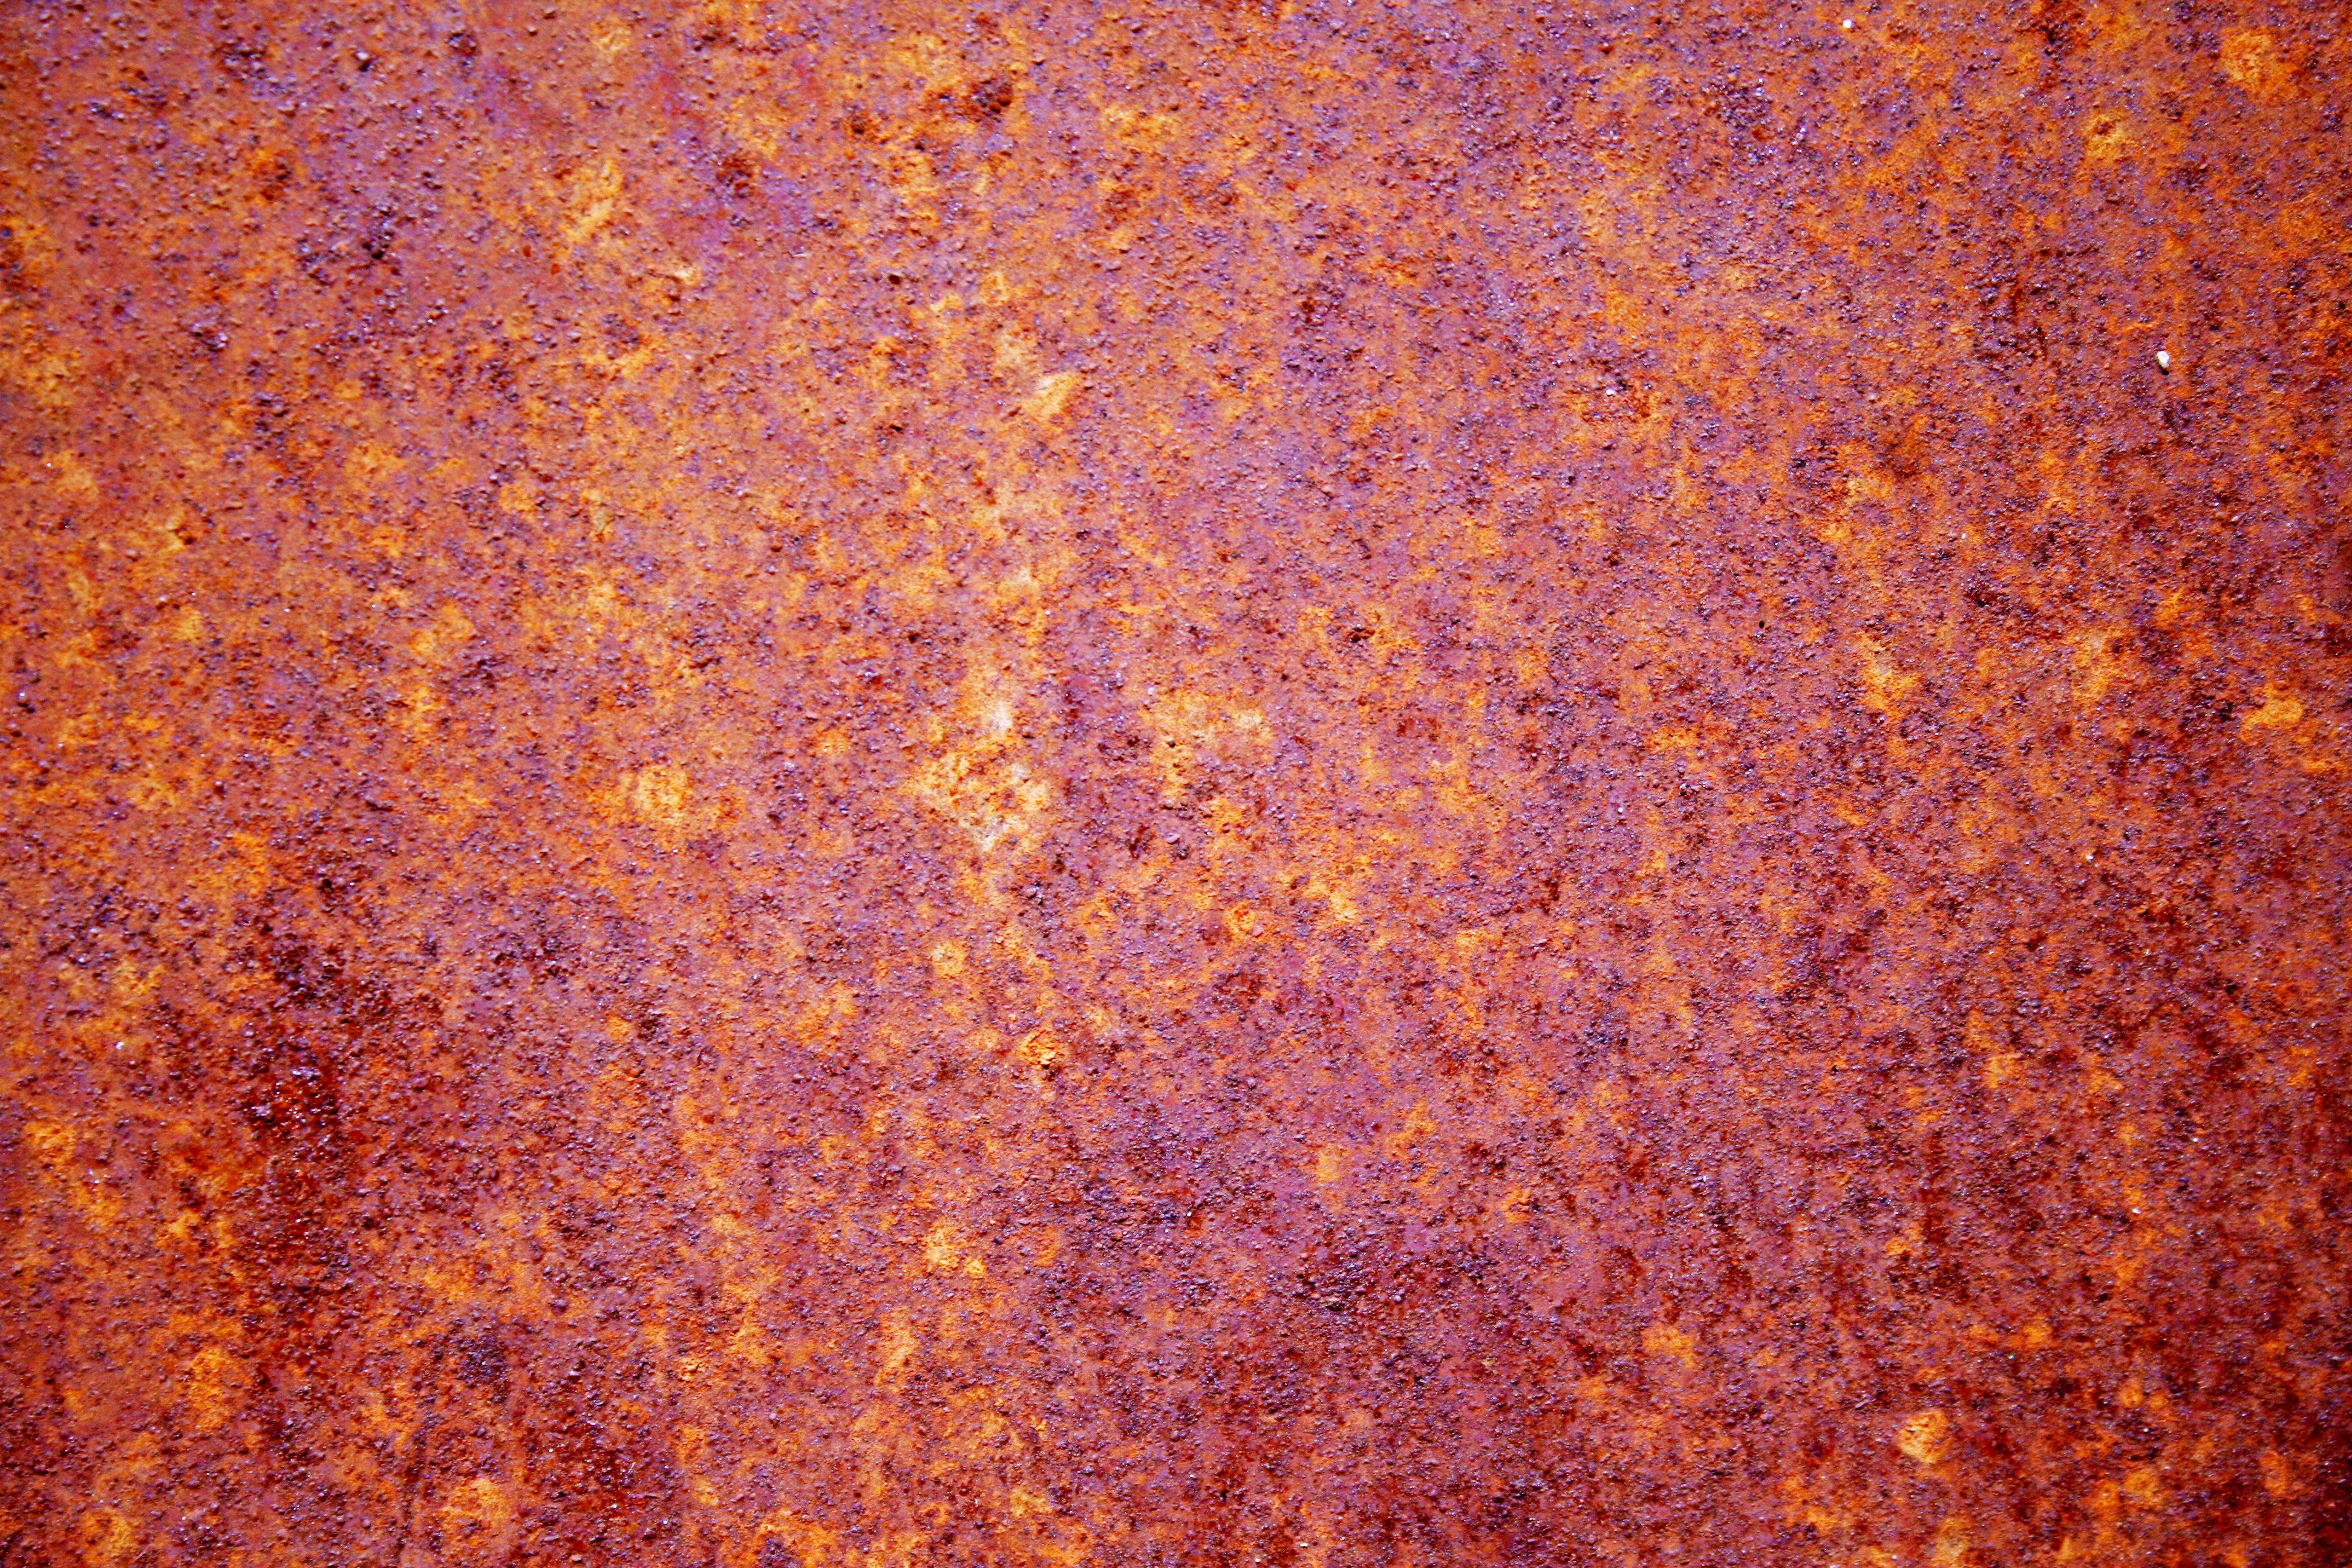 Colorful rust texture by mercurycode on DeviantArt